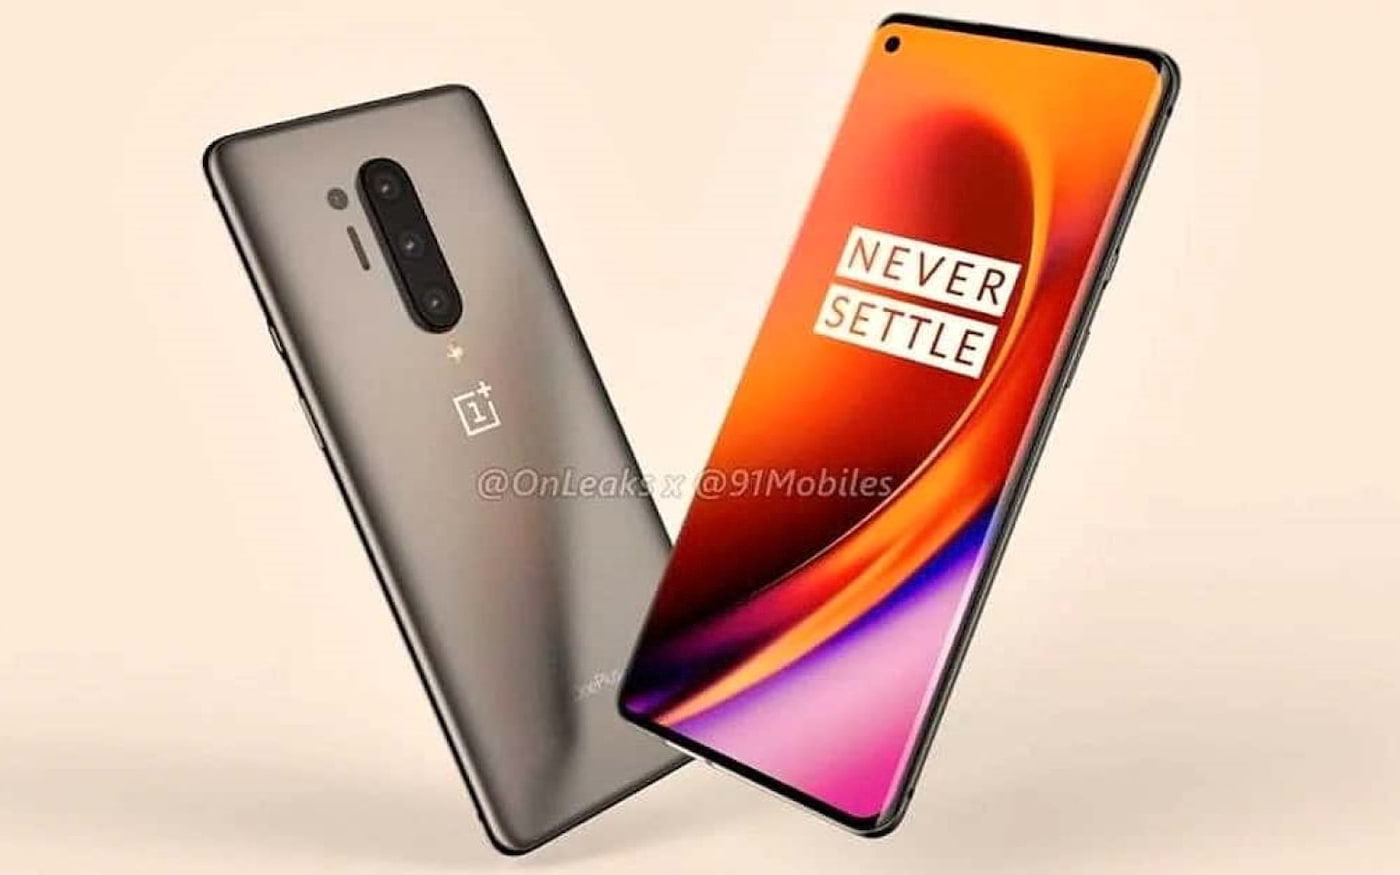 According to rumor, OnePlus 8 will be released sooner and will have lite version